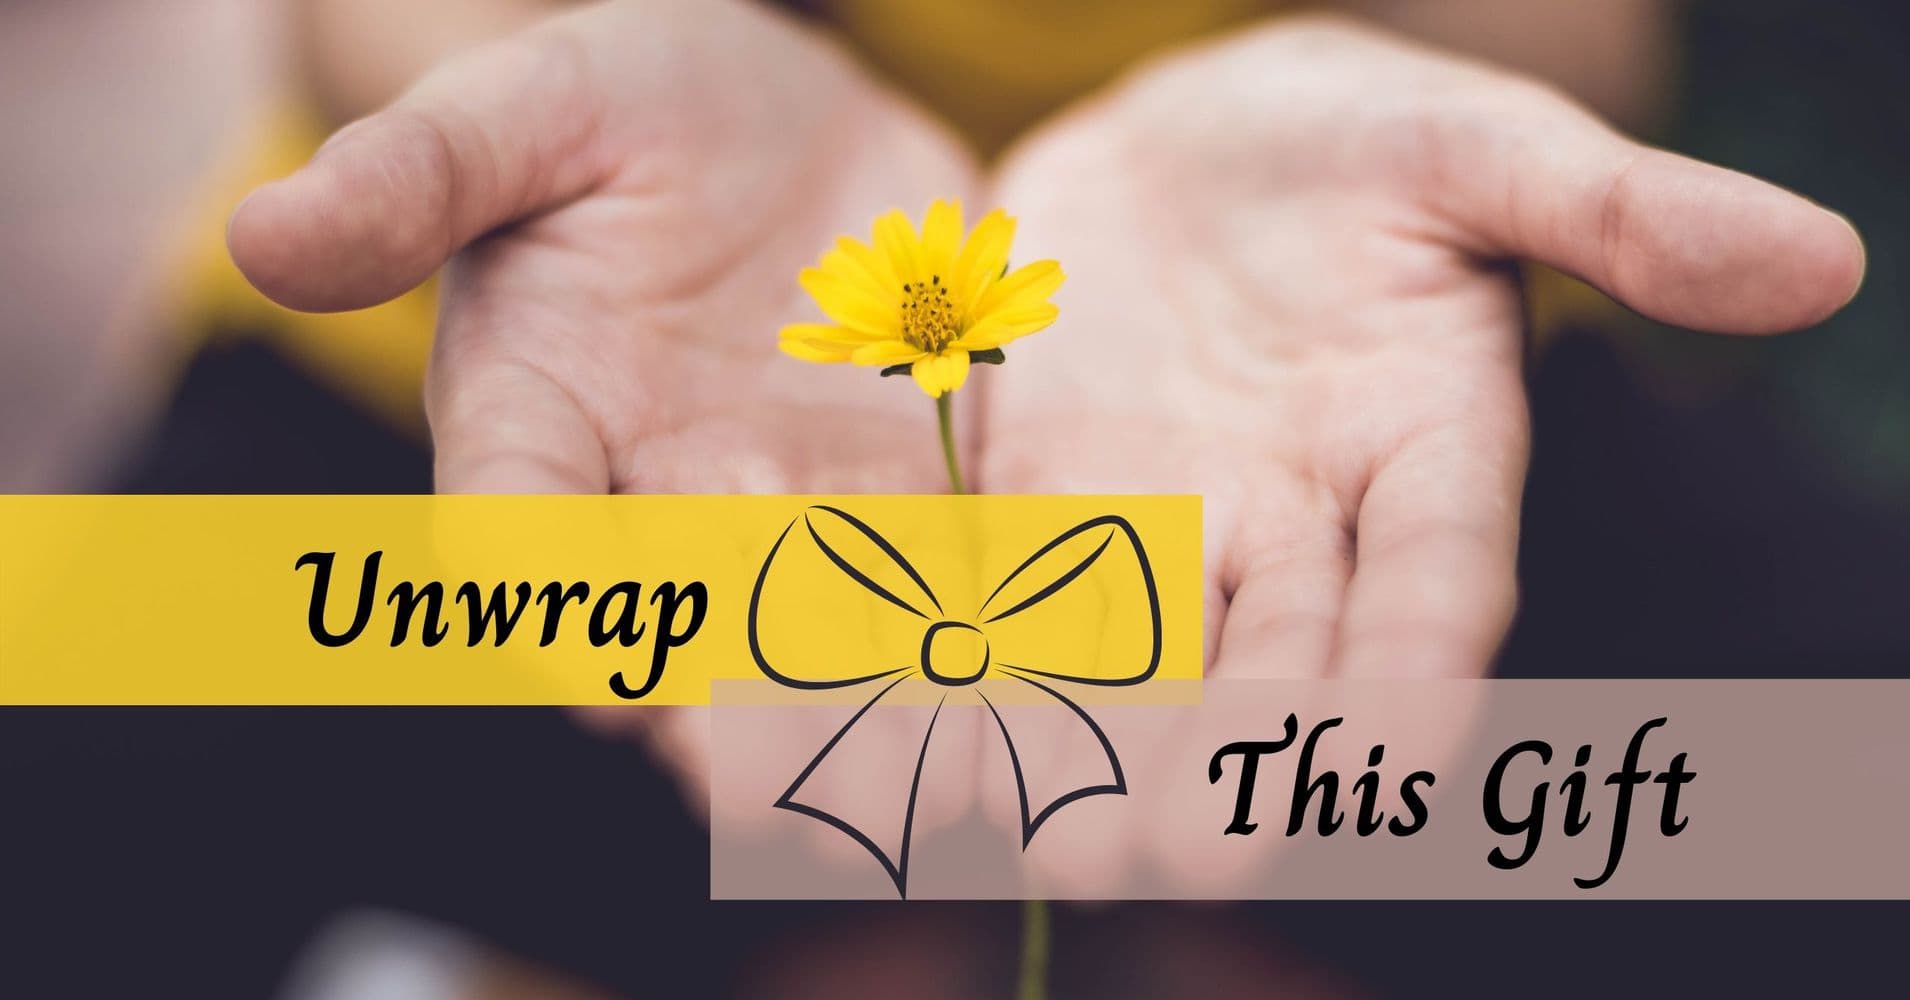 Featured image for “Unwrap This Gift”